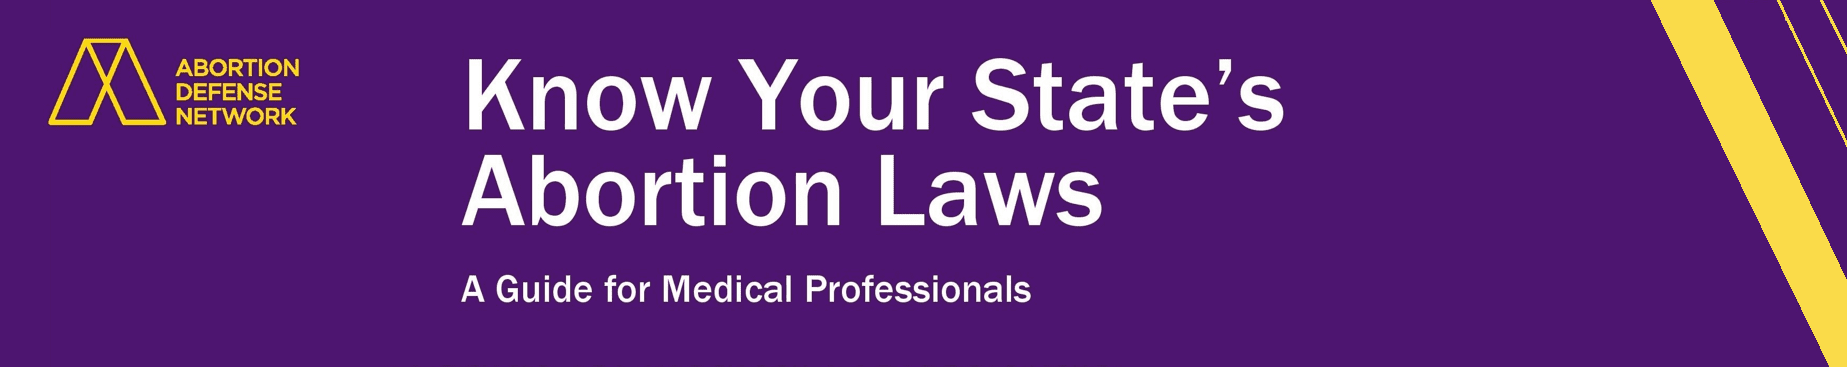 Banner graphic reading "Know Your State's Abortion Laws: A Guide for Medical Professionals" with the Abortion Defense Network logo